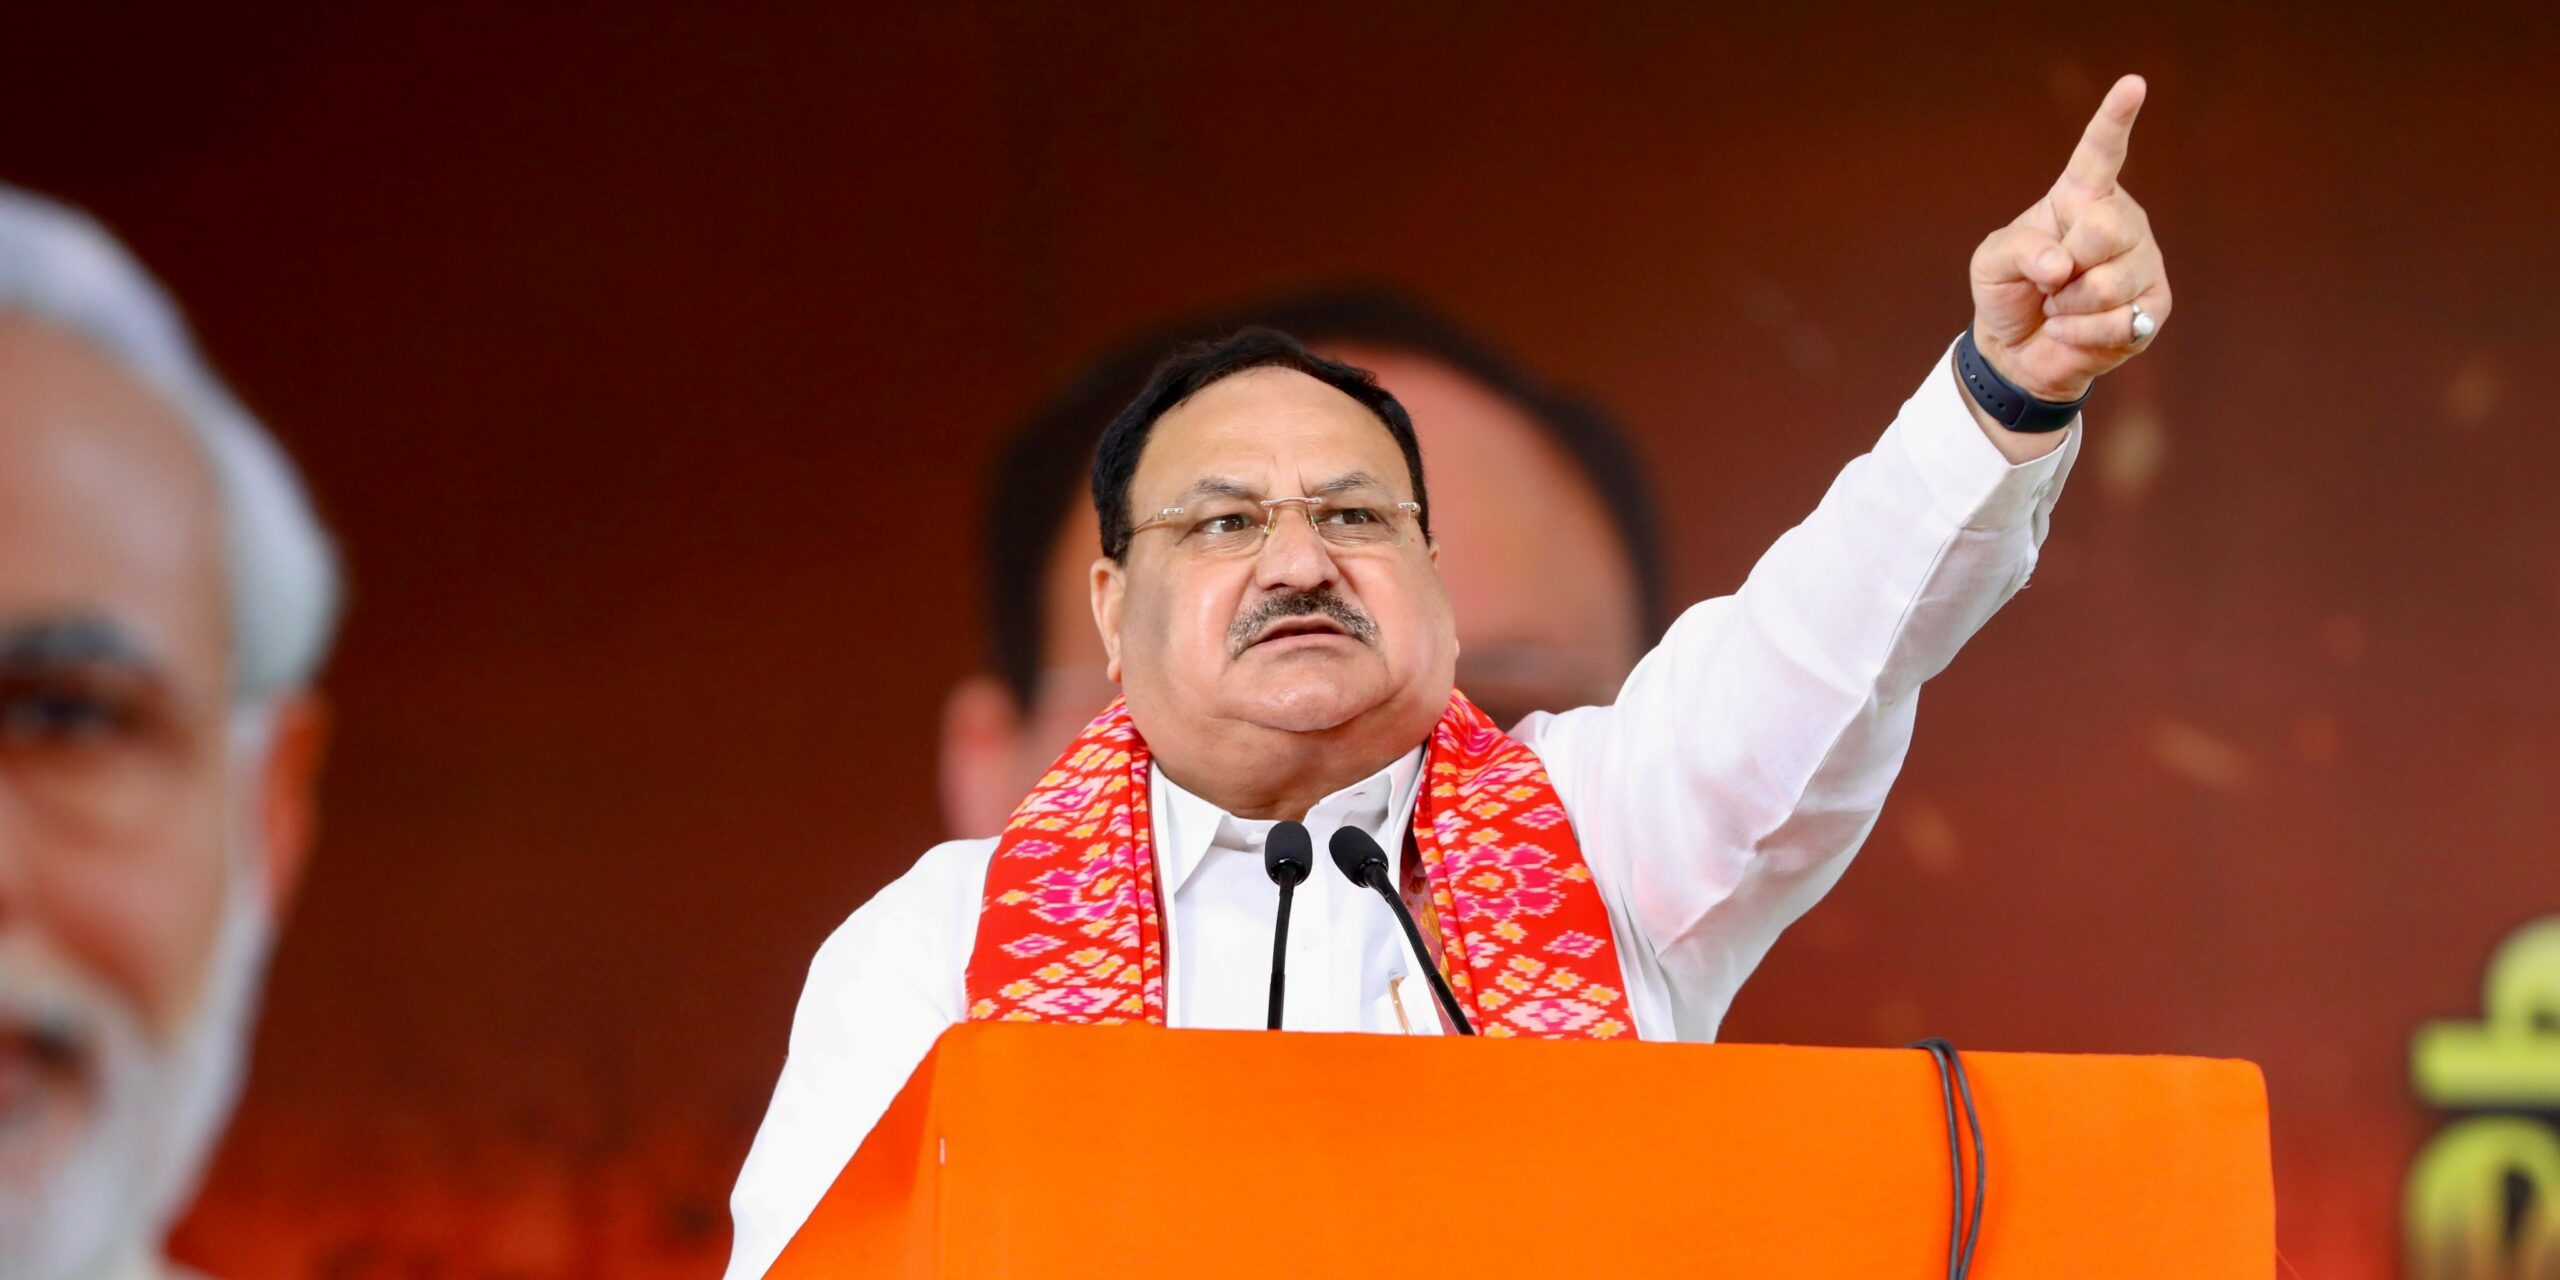 BJP national president Nadda to pep up Tamil Nadu BJP on his visit to Chennai on 11 February